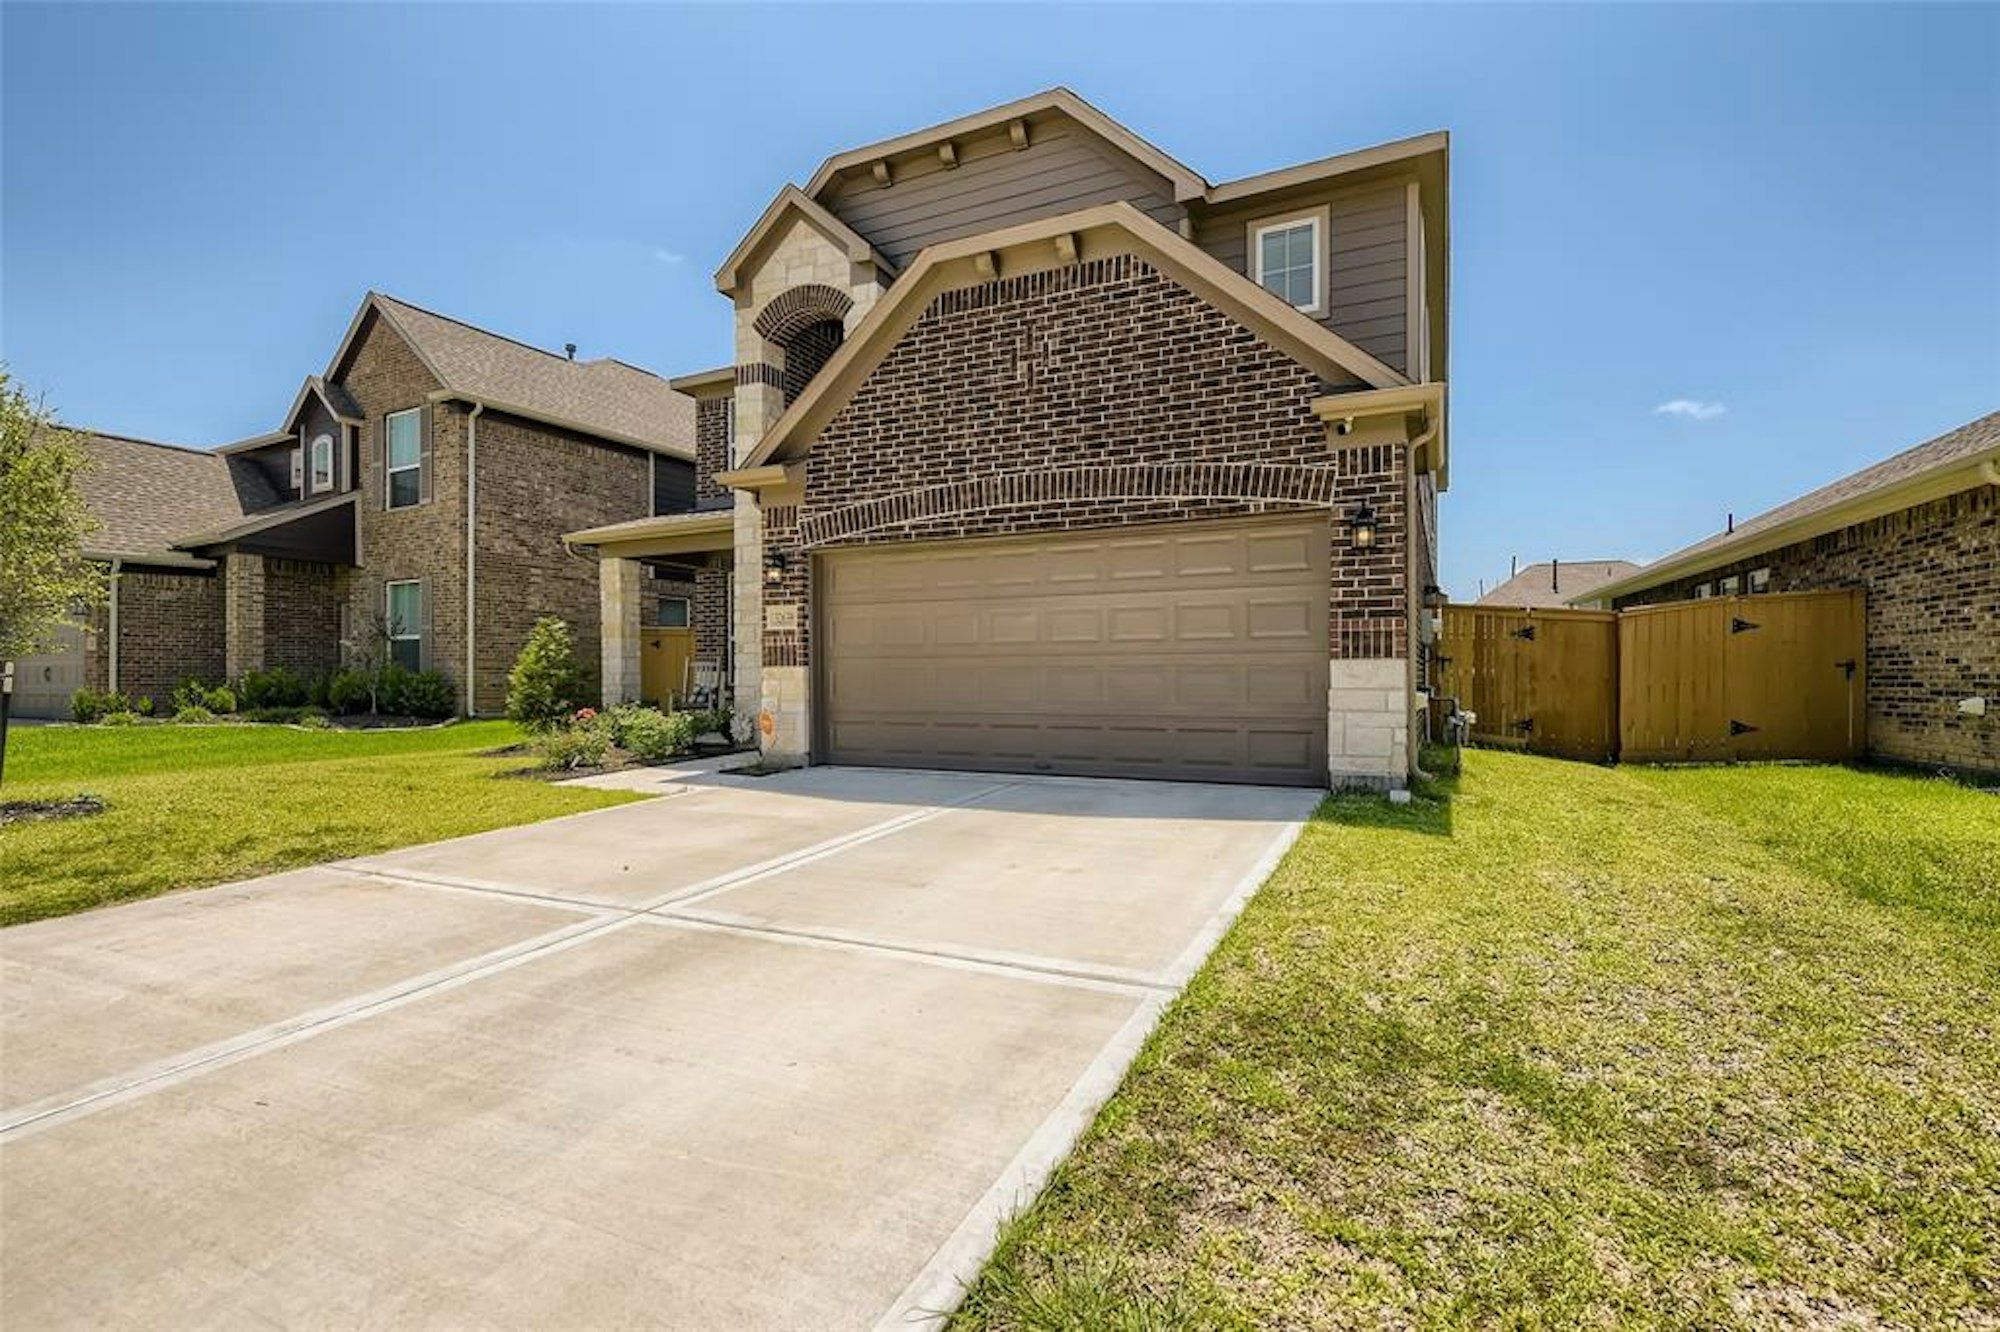 Photo 1 of 29 - 32639 Timber Point Dr, Brookshire, TX 77423